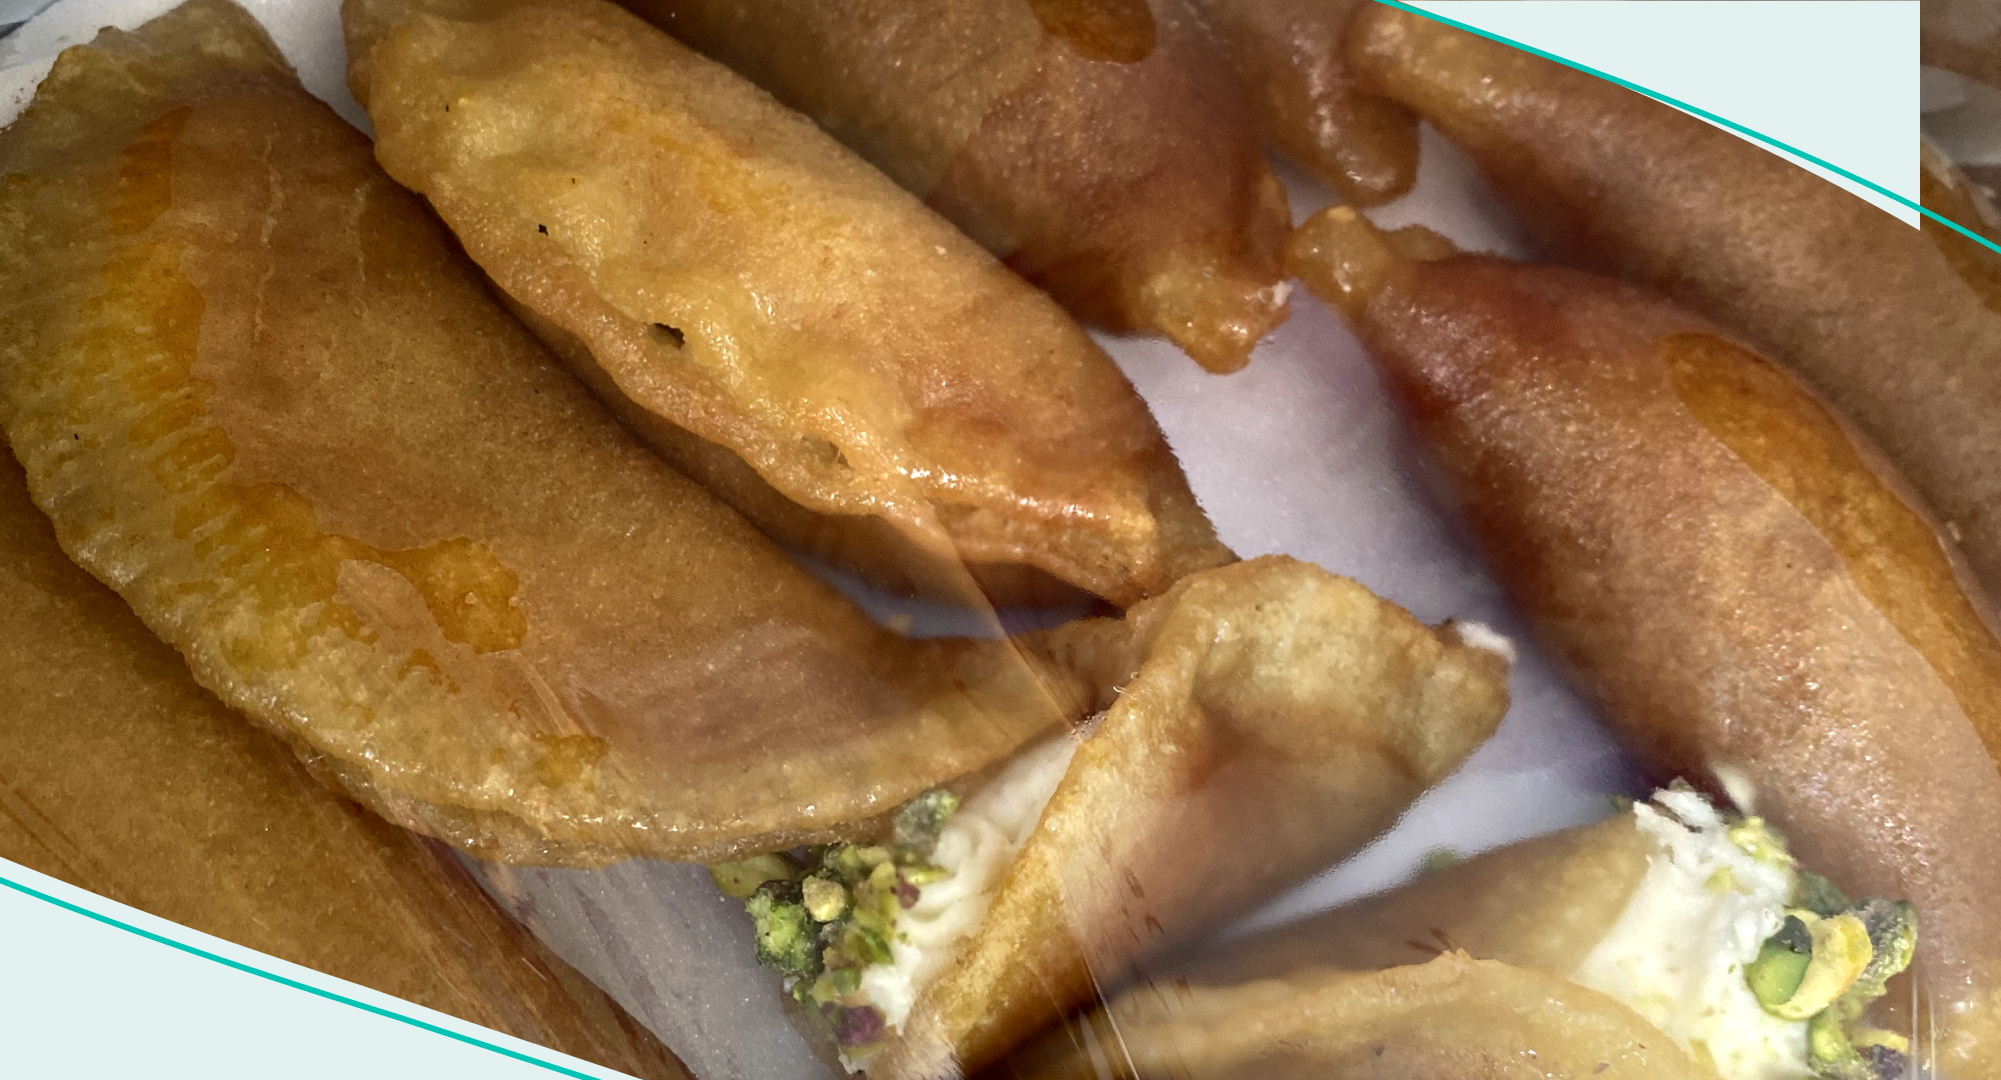 Atayef is a dessert filled with cream or nuts that's popular during Ramadan